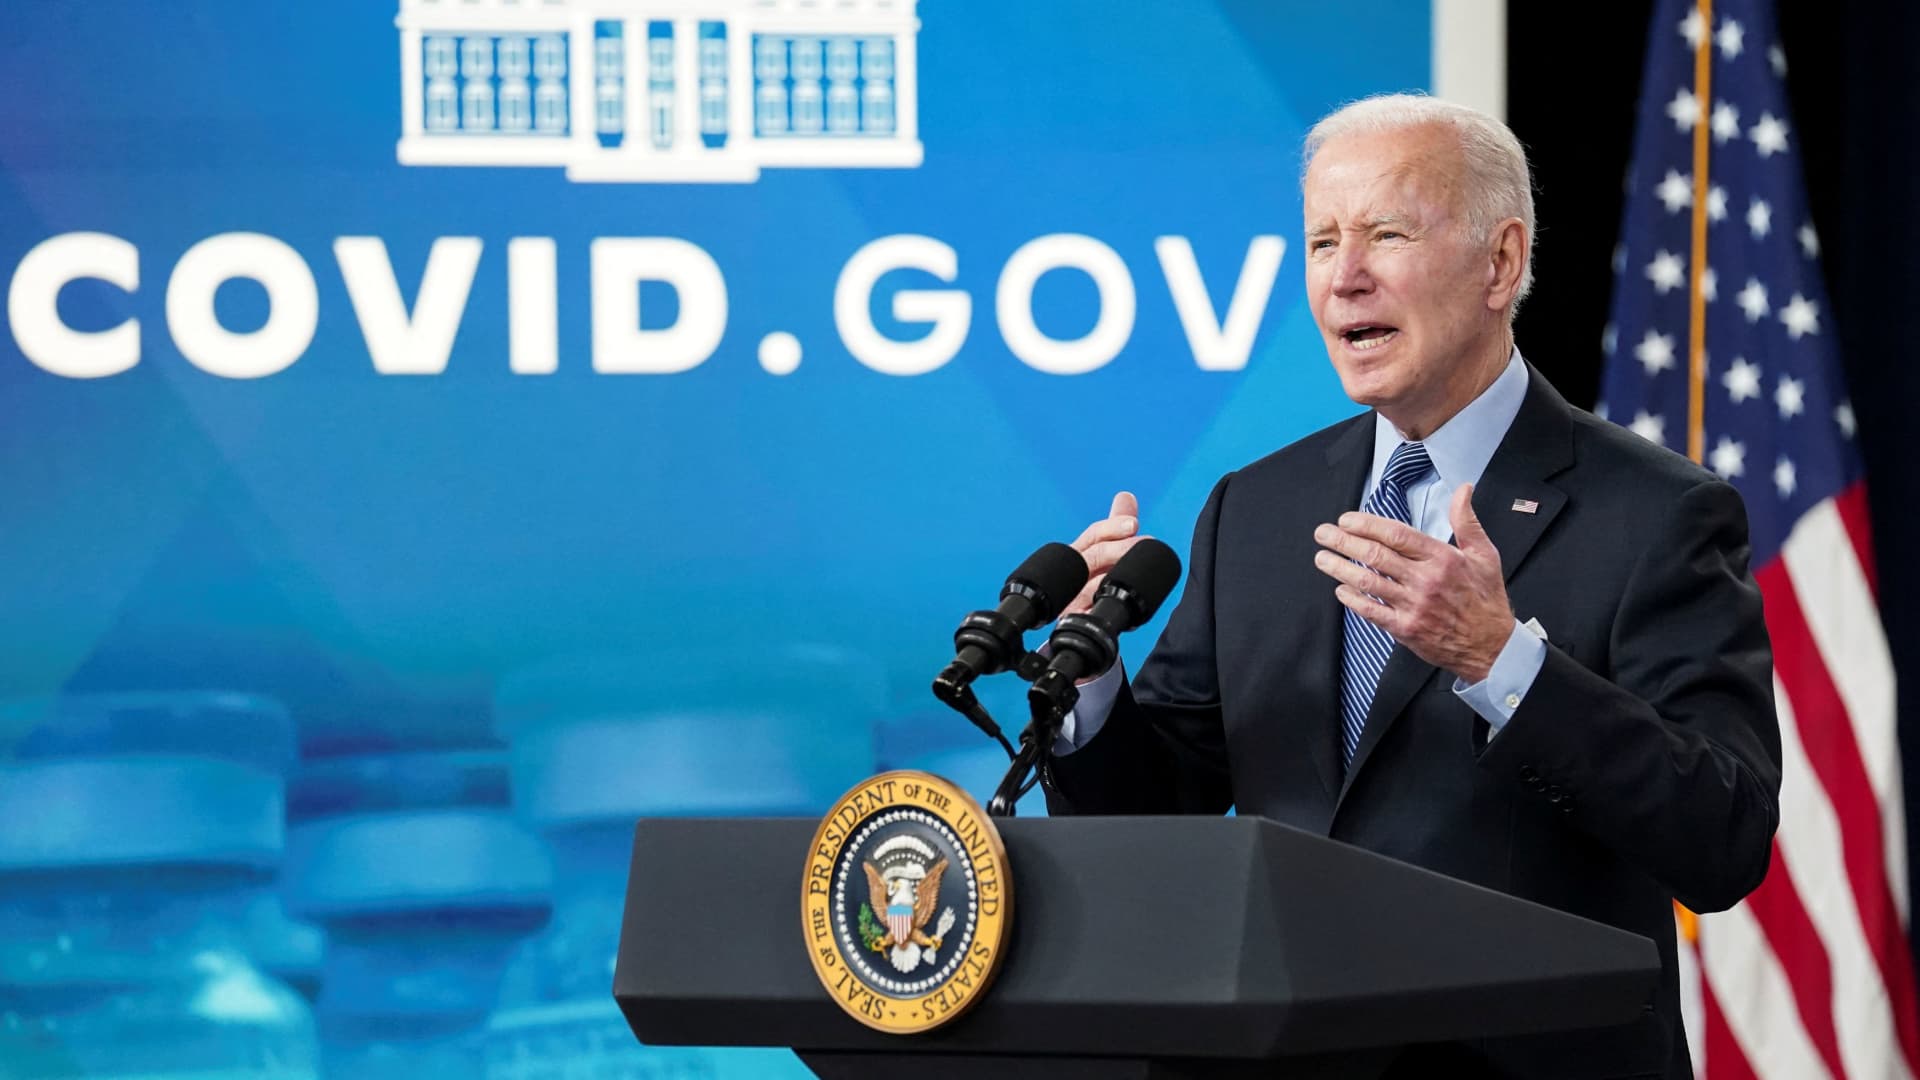 Biden administration plans to end Covid public health emergency on May 11